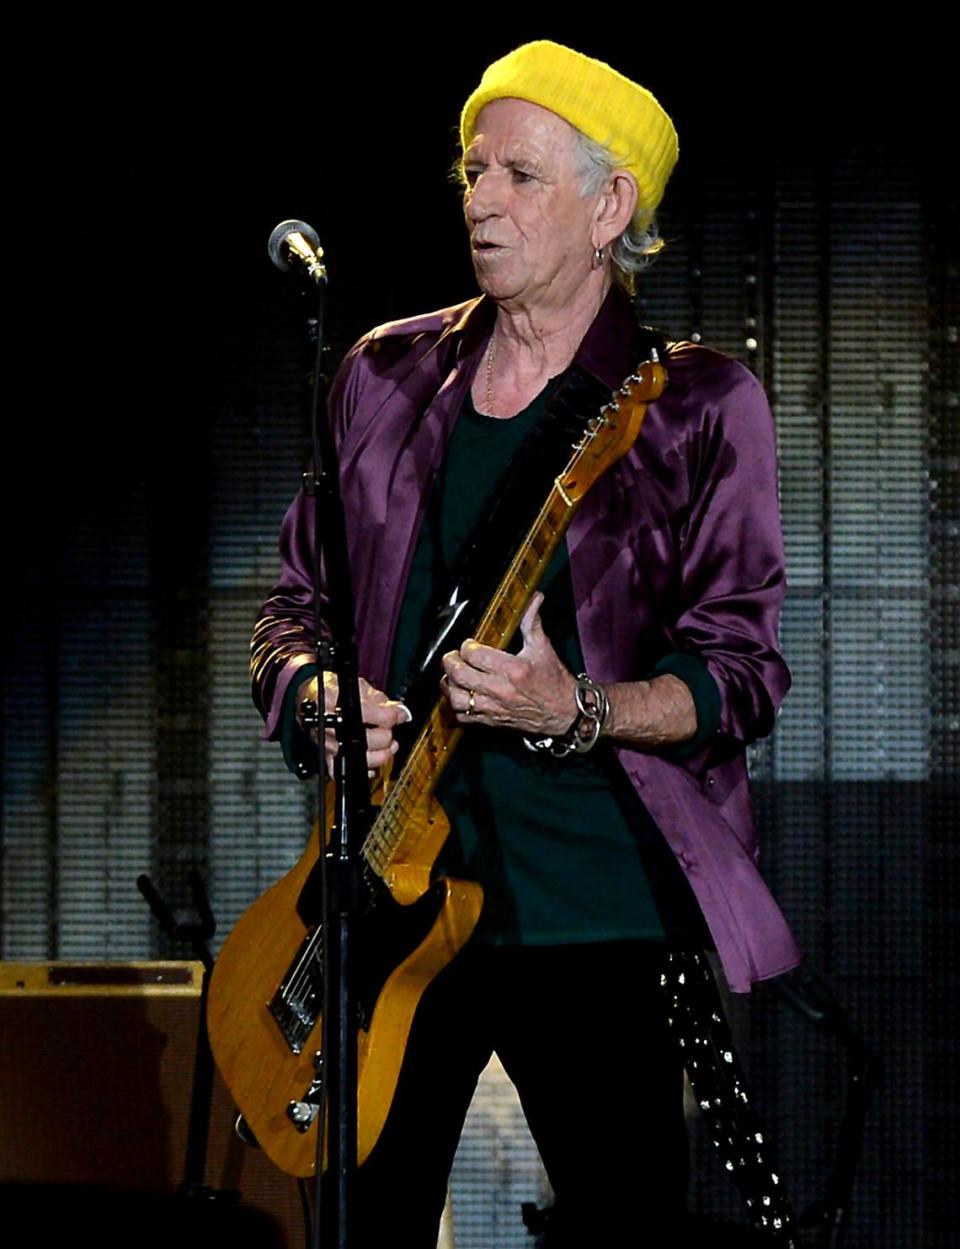 Keith Richards and the Rolling Stones perform one of the groups hits at Bank of America Stadium in Charlotte, NC on Thursday, September 30, 2021.